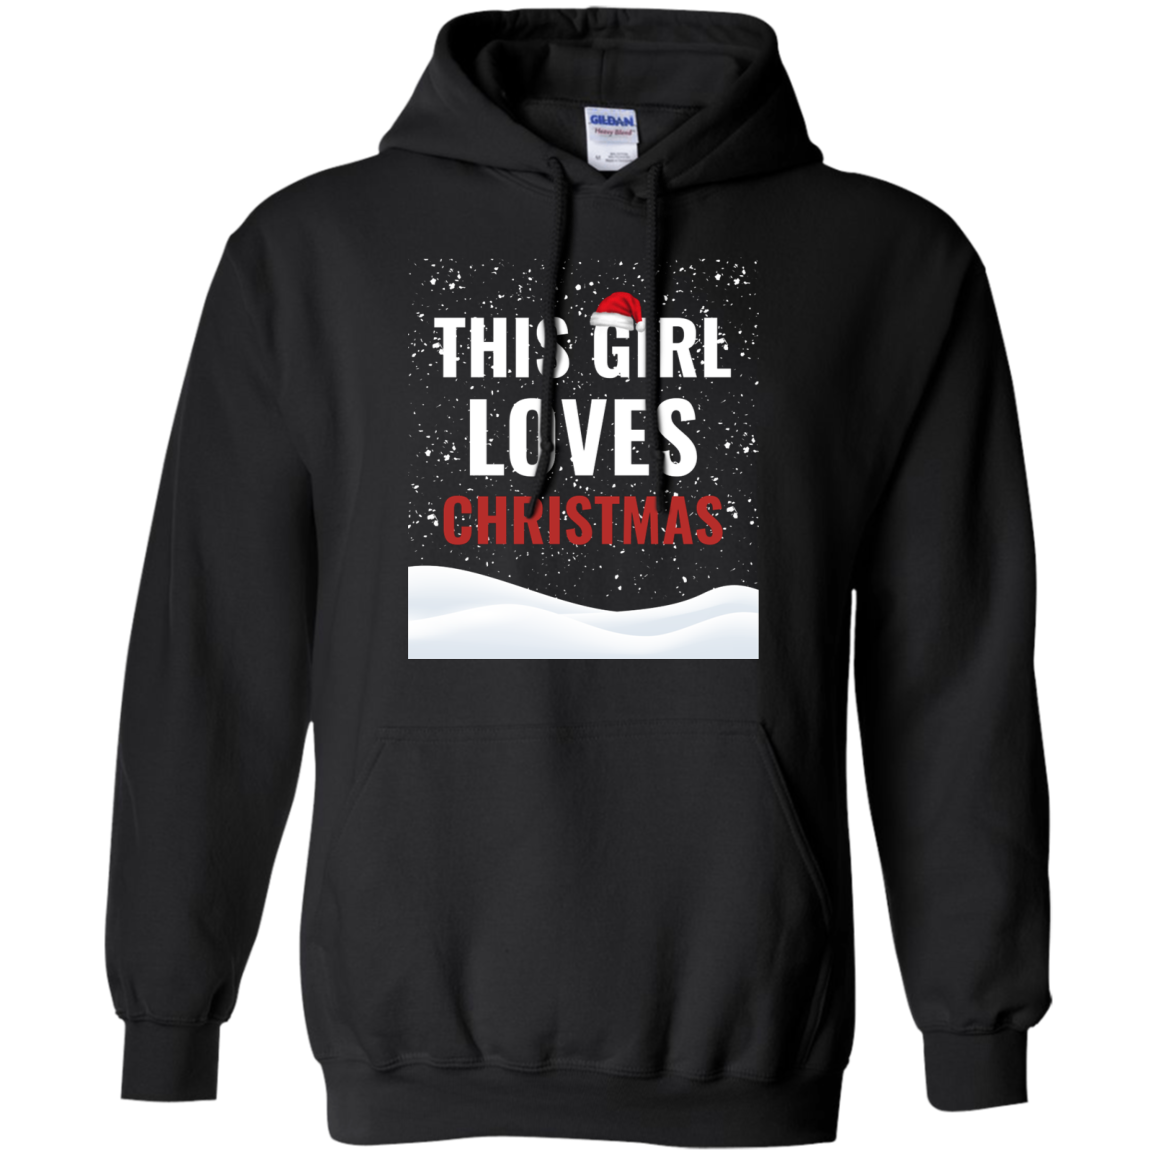 This Girl Loves Christmas Holidays Xmas Pullover Hoodie 8 oz.